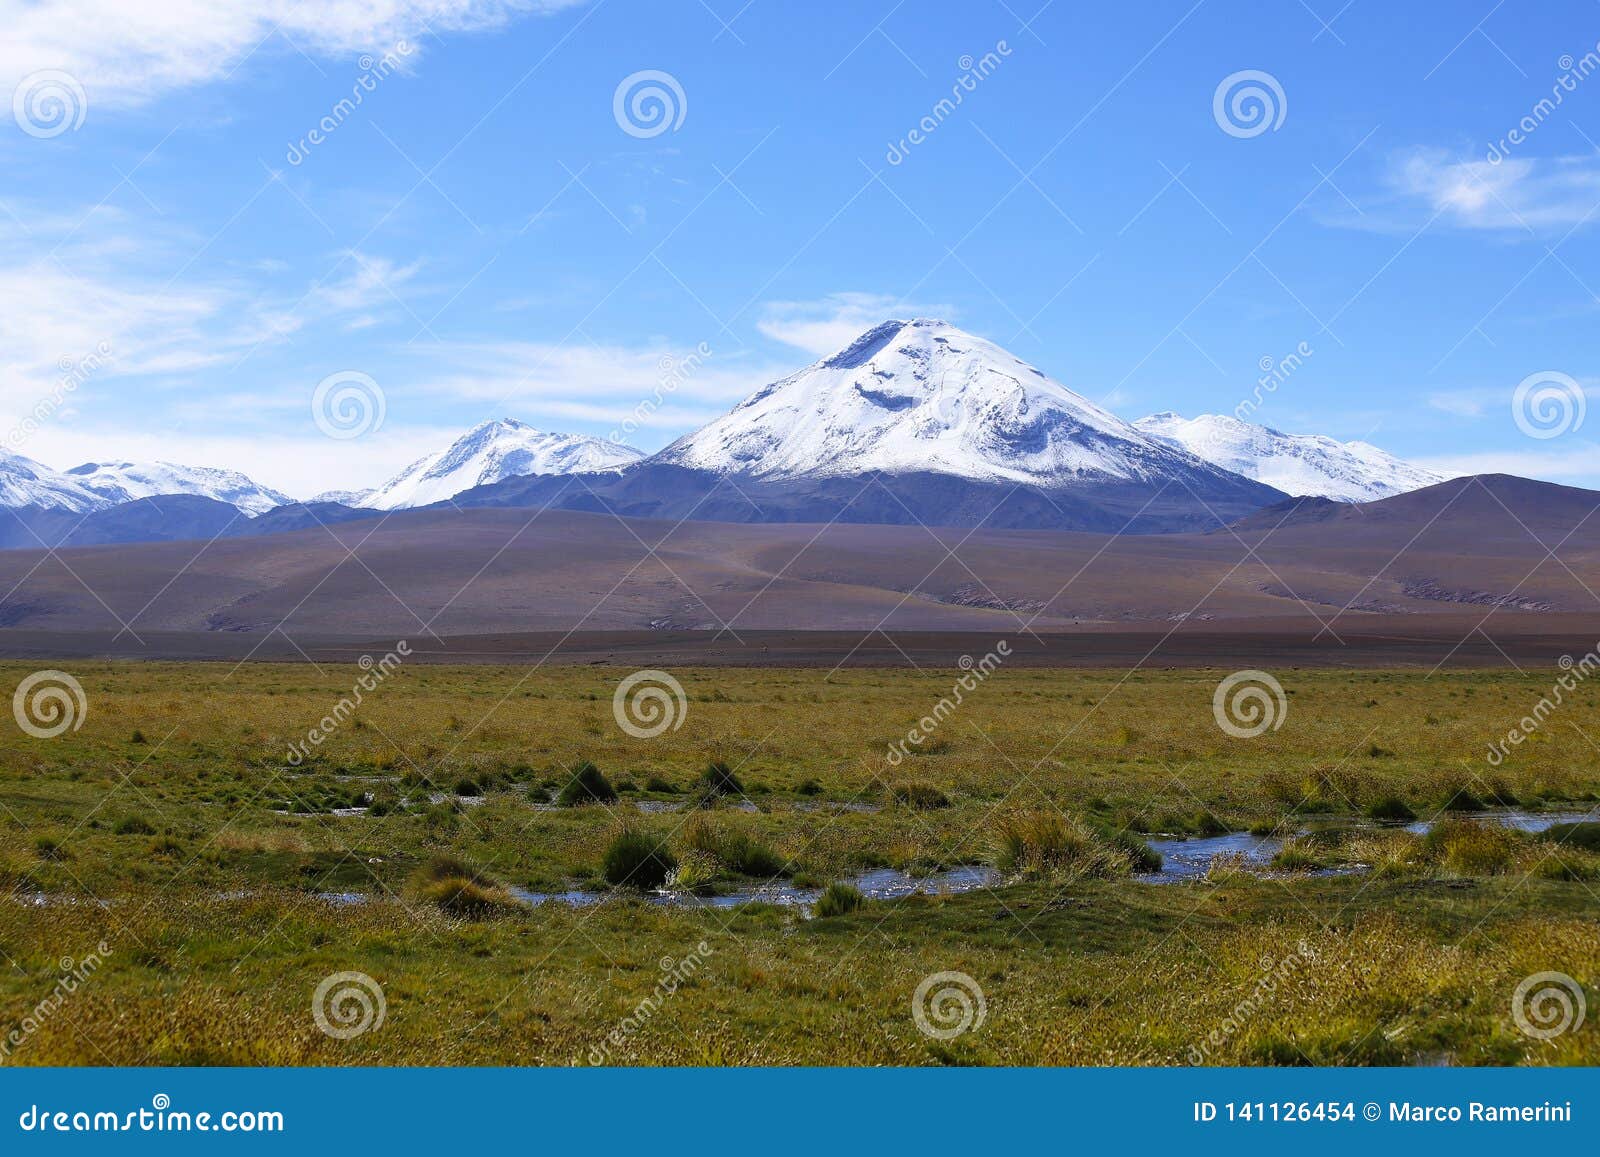 The Landscape of Northern Chile with the Andes Mountains and Volcanoes ...